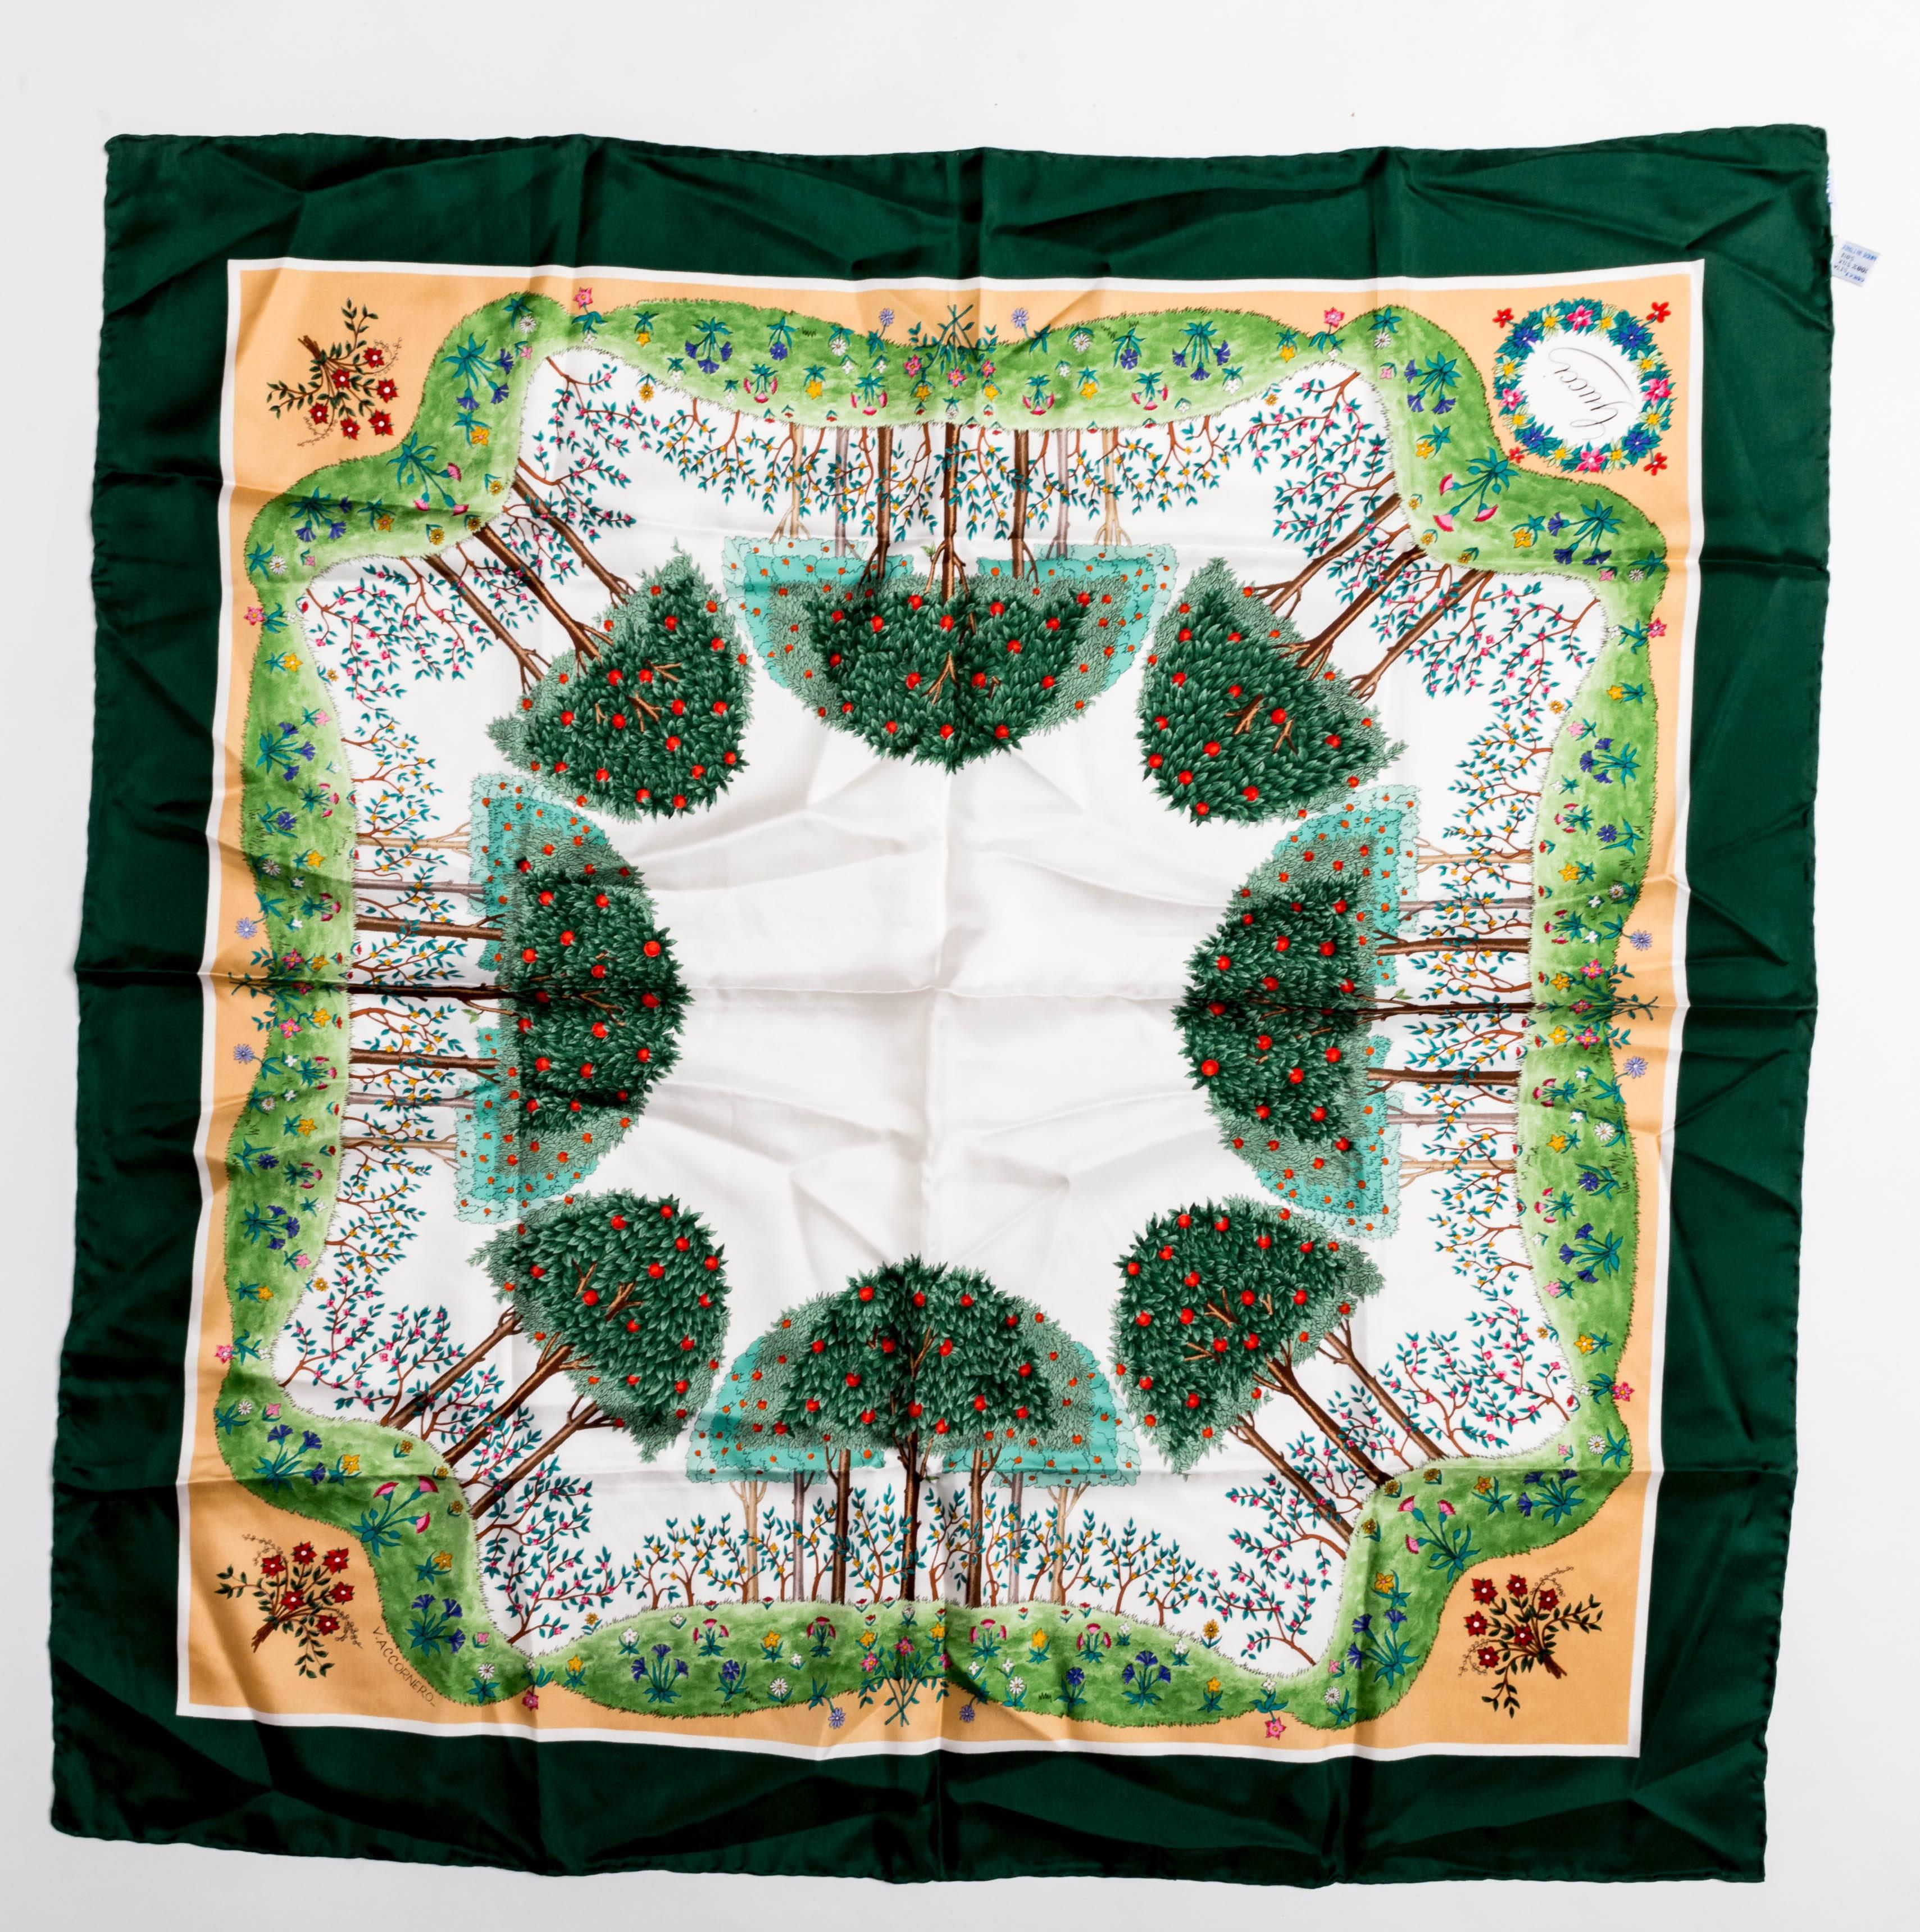 Vintage Gucci Silk Scarf with Green Border featuring apple trees surrounded by a floral garland. Condition is excellent.